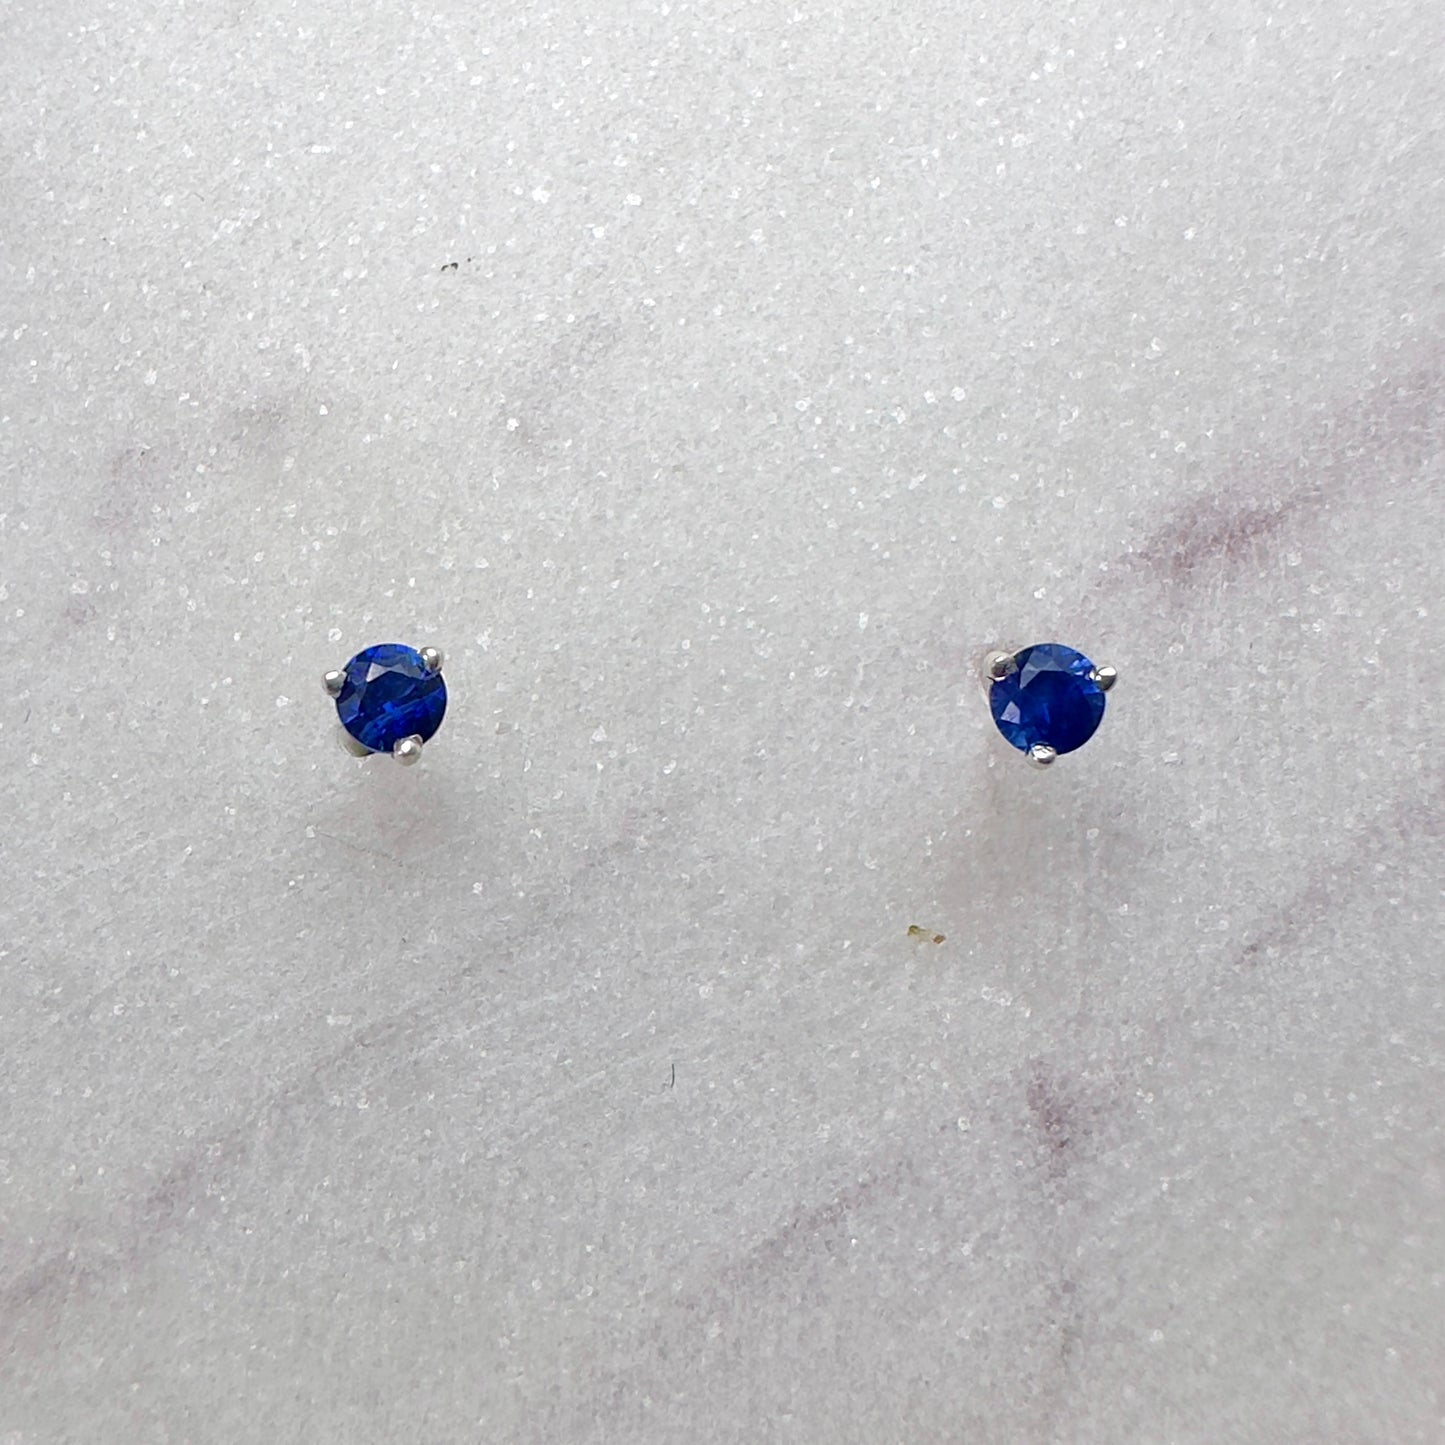 Gemstone Stud Earring: 3 Prong ‘Cocktail’ Style Setting